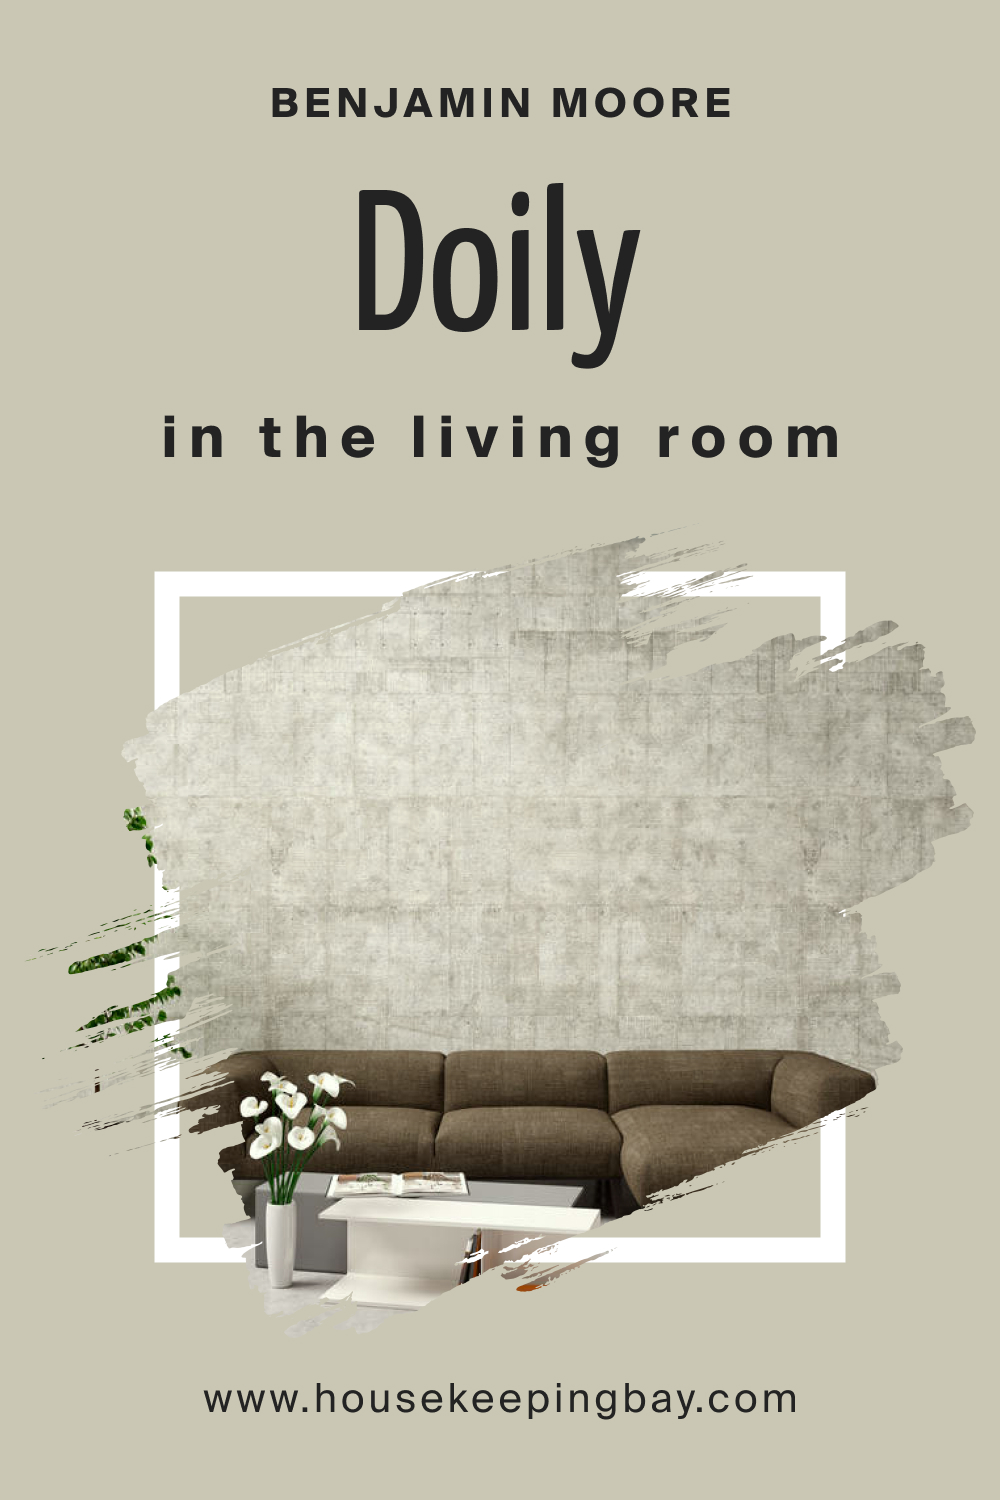 How to Use BM Doily CSP-130 in the Living Room?